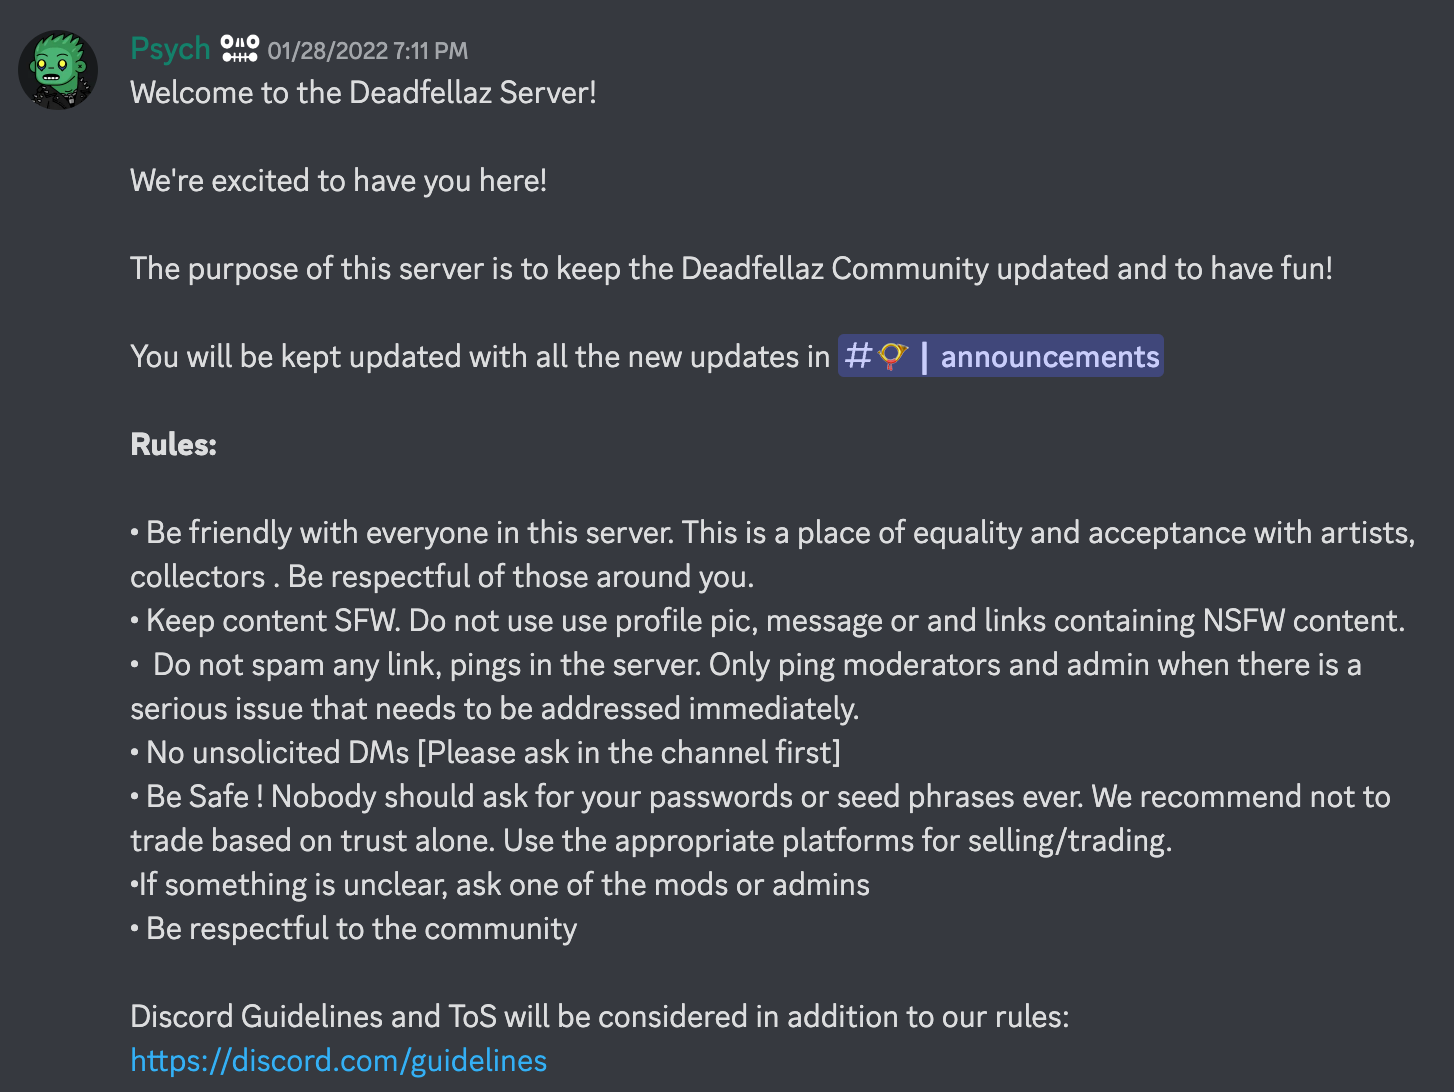 Rules from the DeadFellaz Community